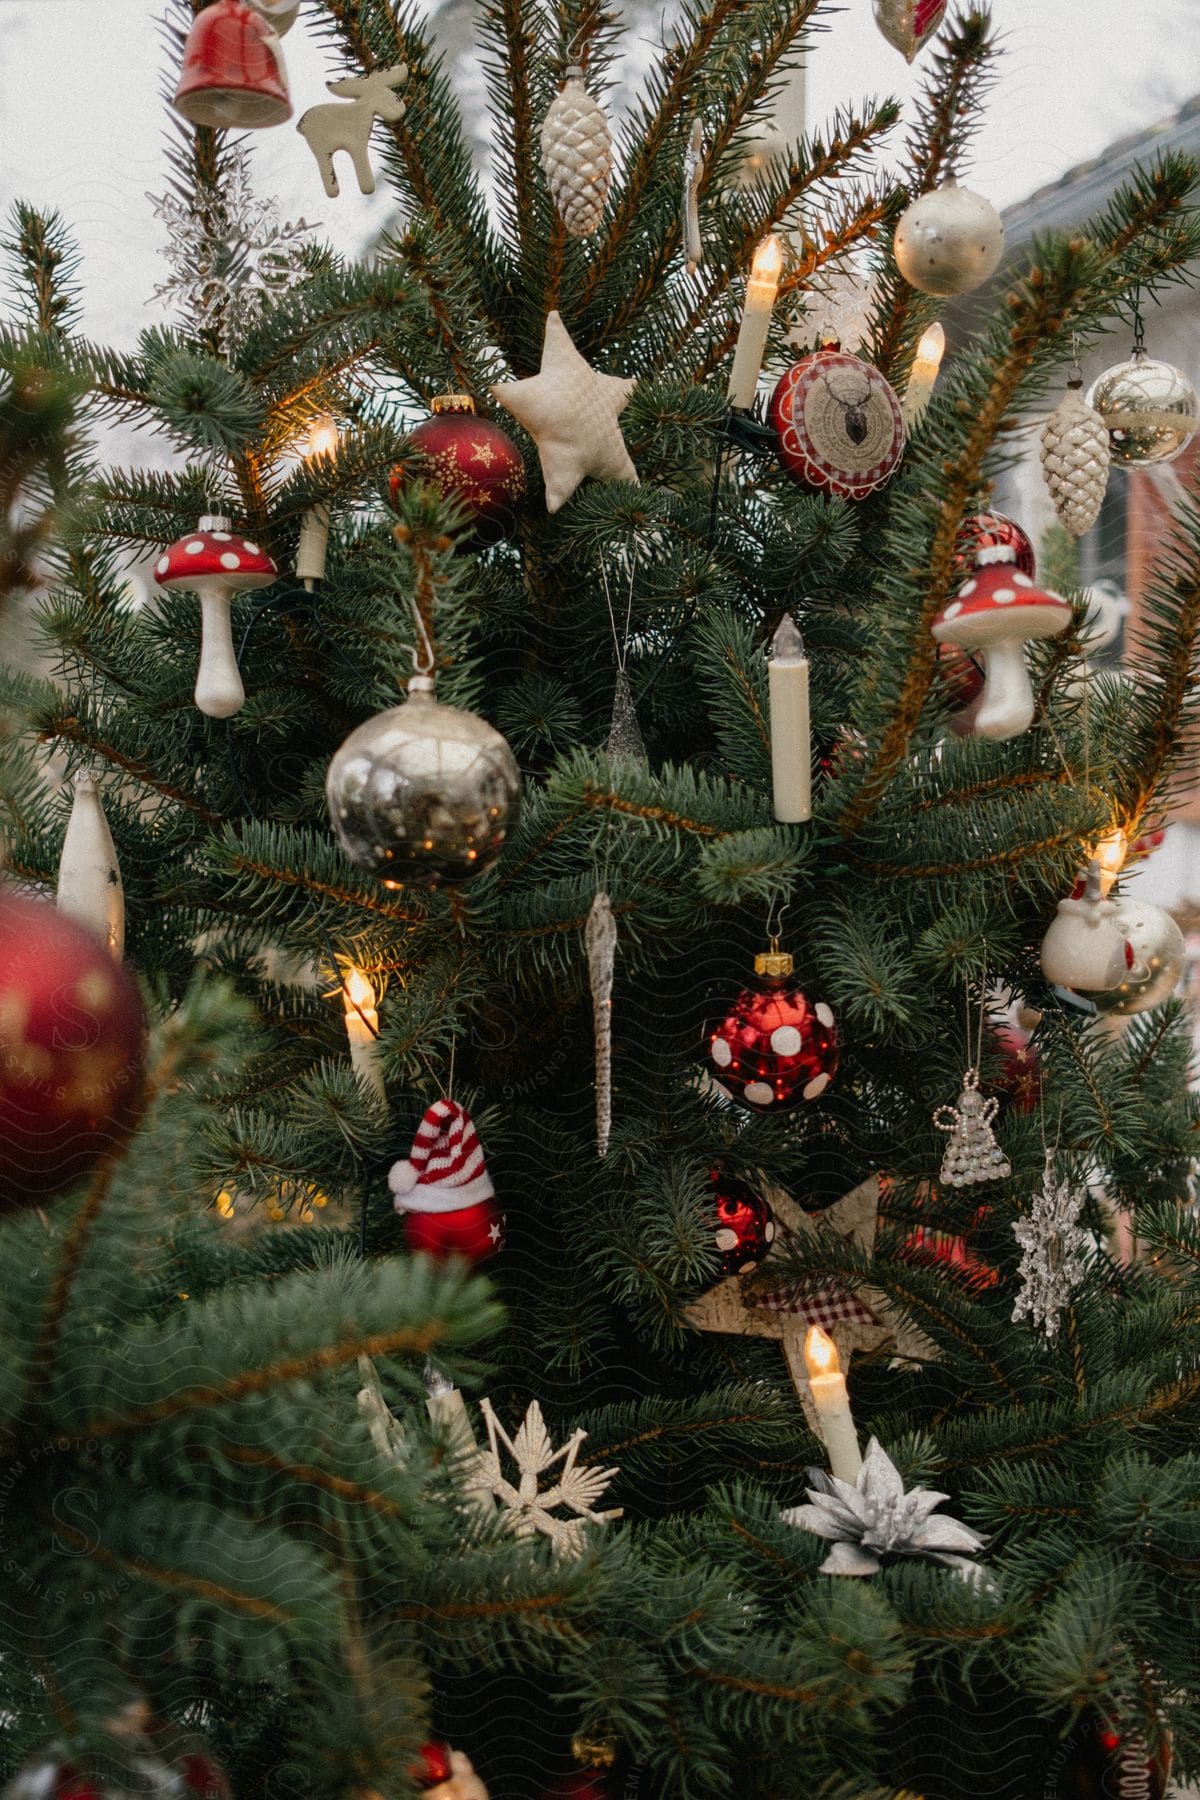 A Christmas tree with many ornaments placed throughout.